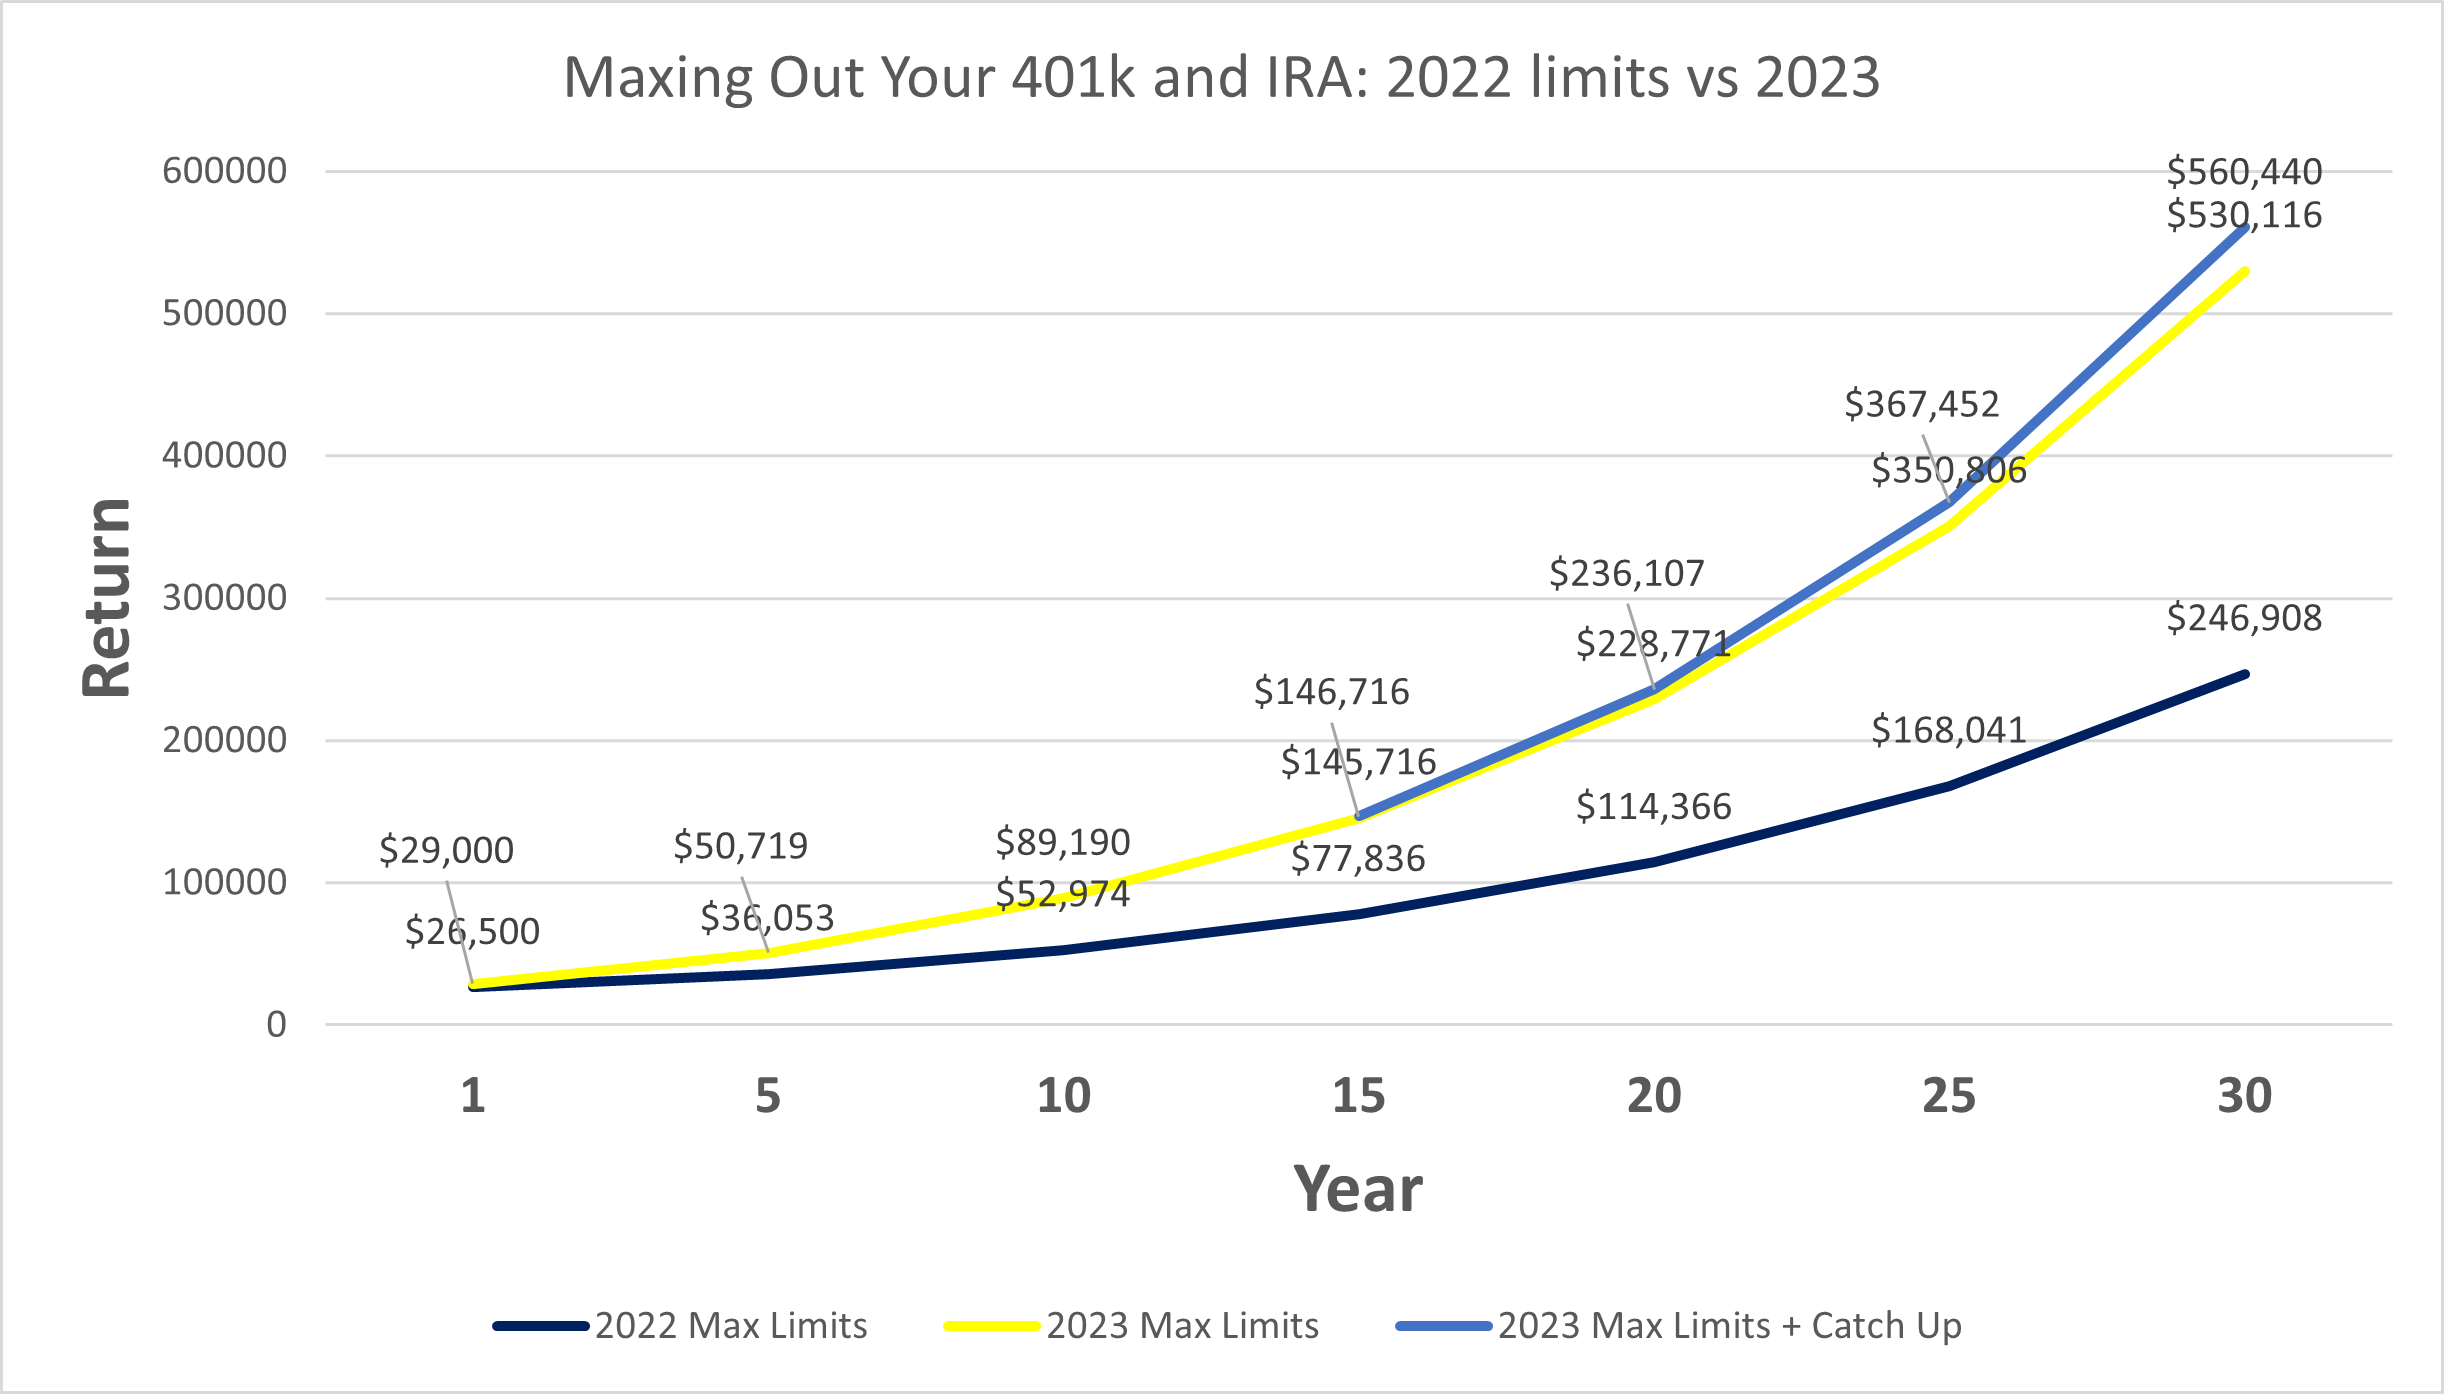 New 401(k) and IRA Limits Could Equal an Additional 300k in Your Pocket